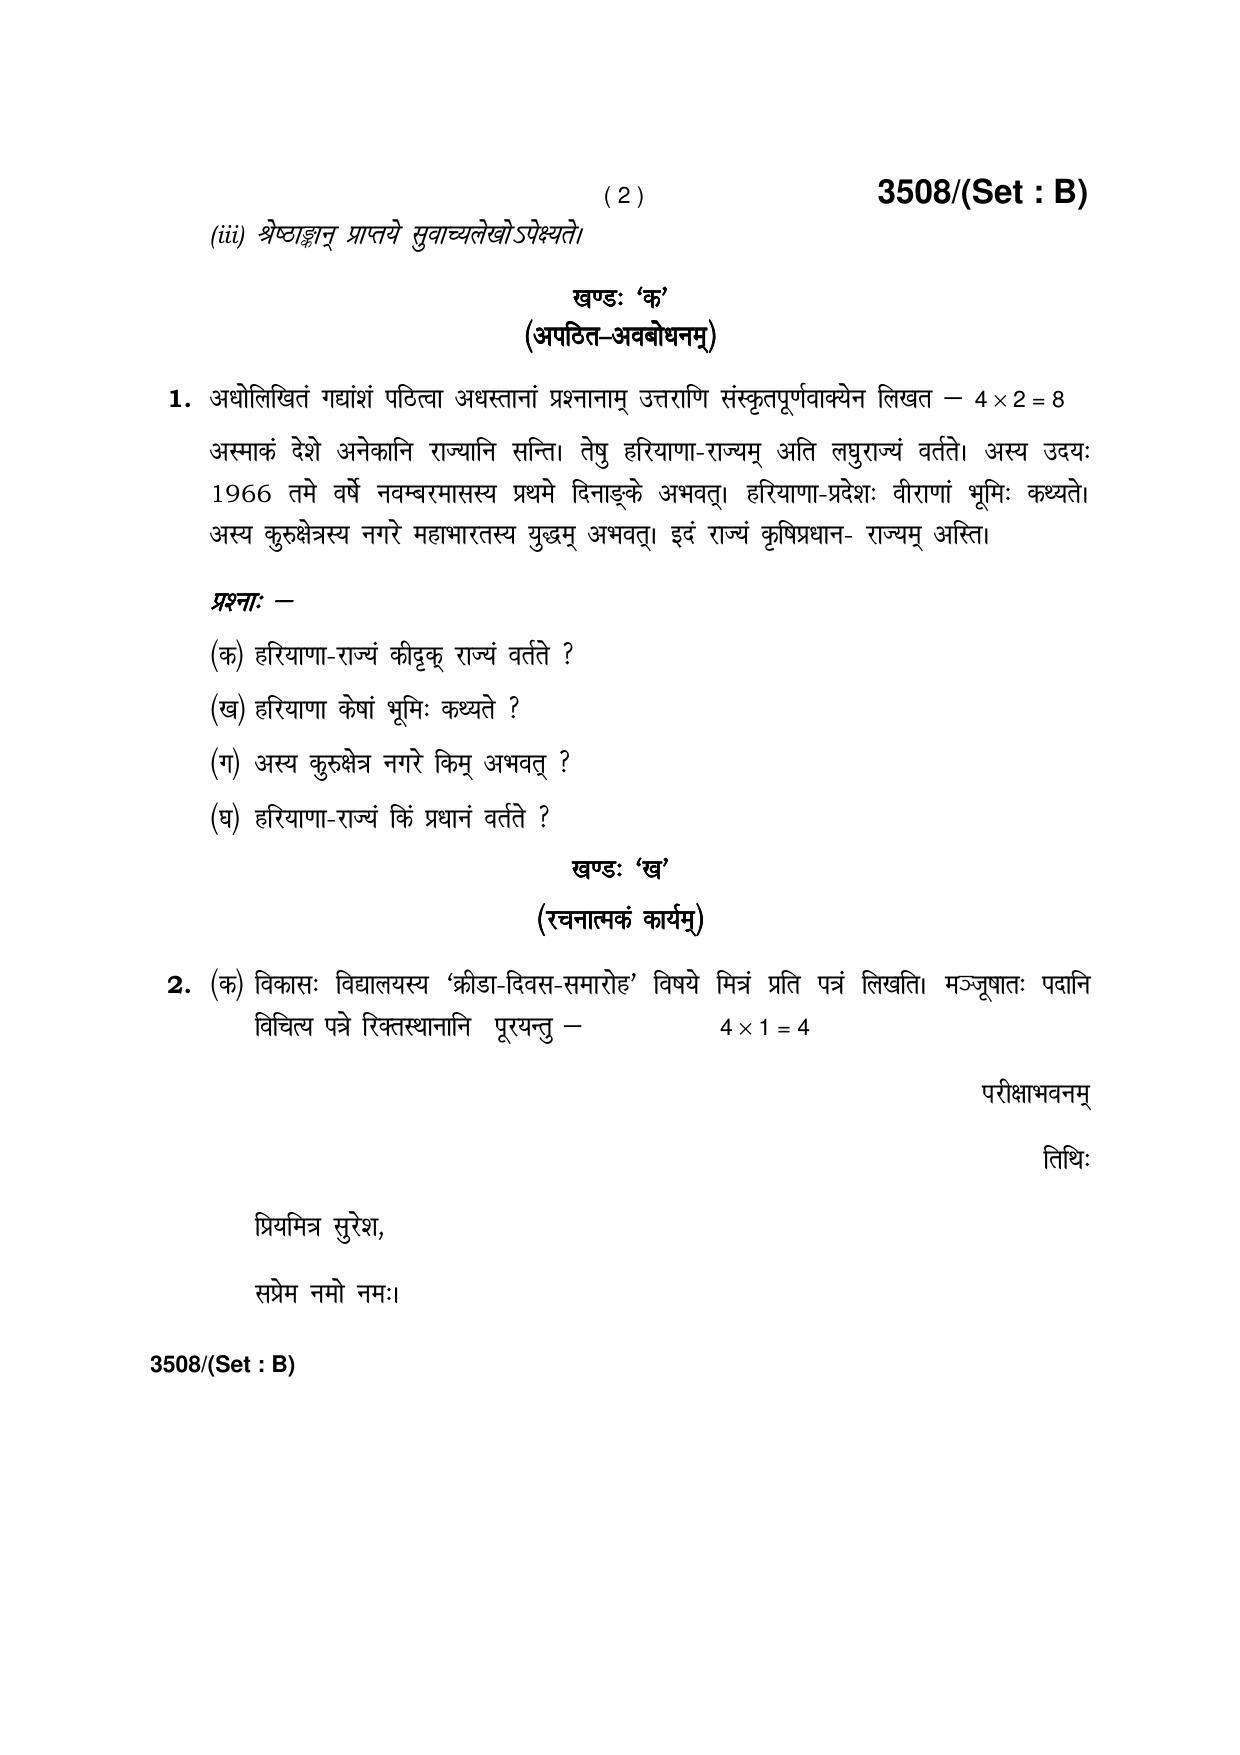 Haryana Board HBSE Class 10 Sanskrit -B 2018 Question Paper - Page 2